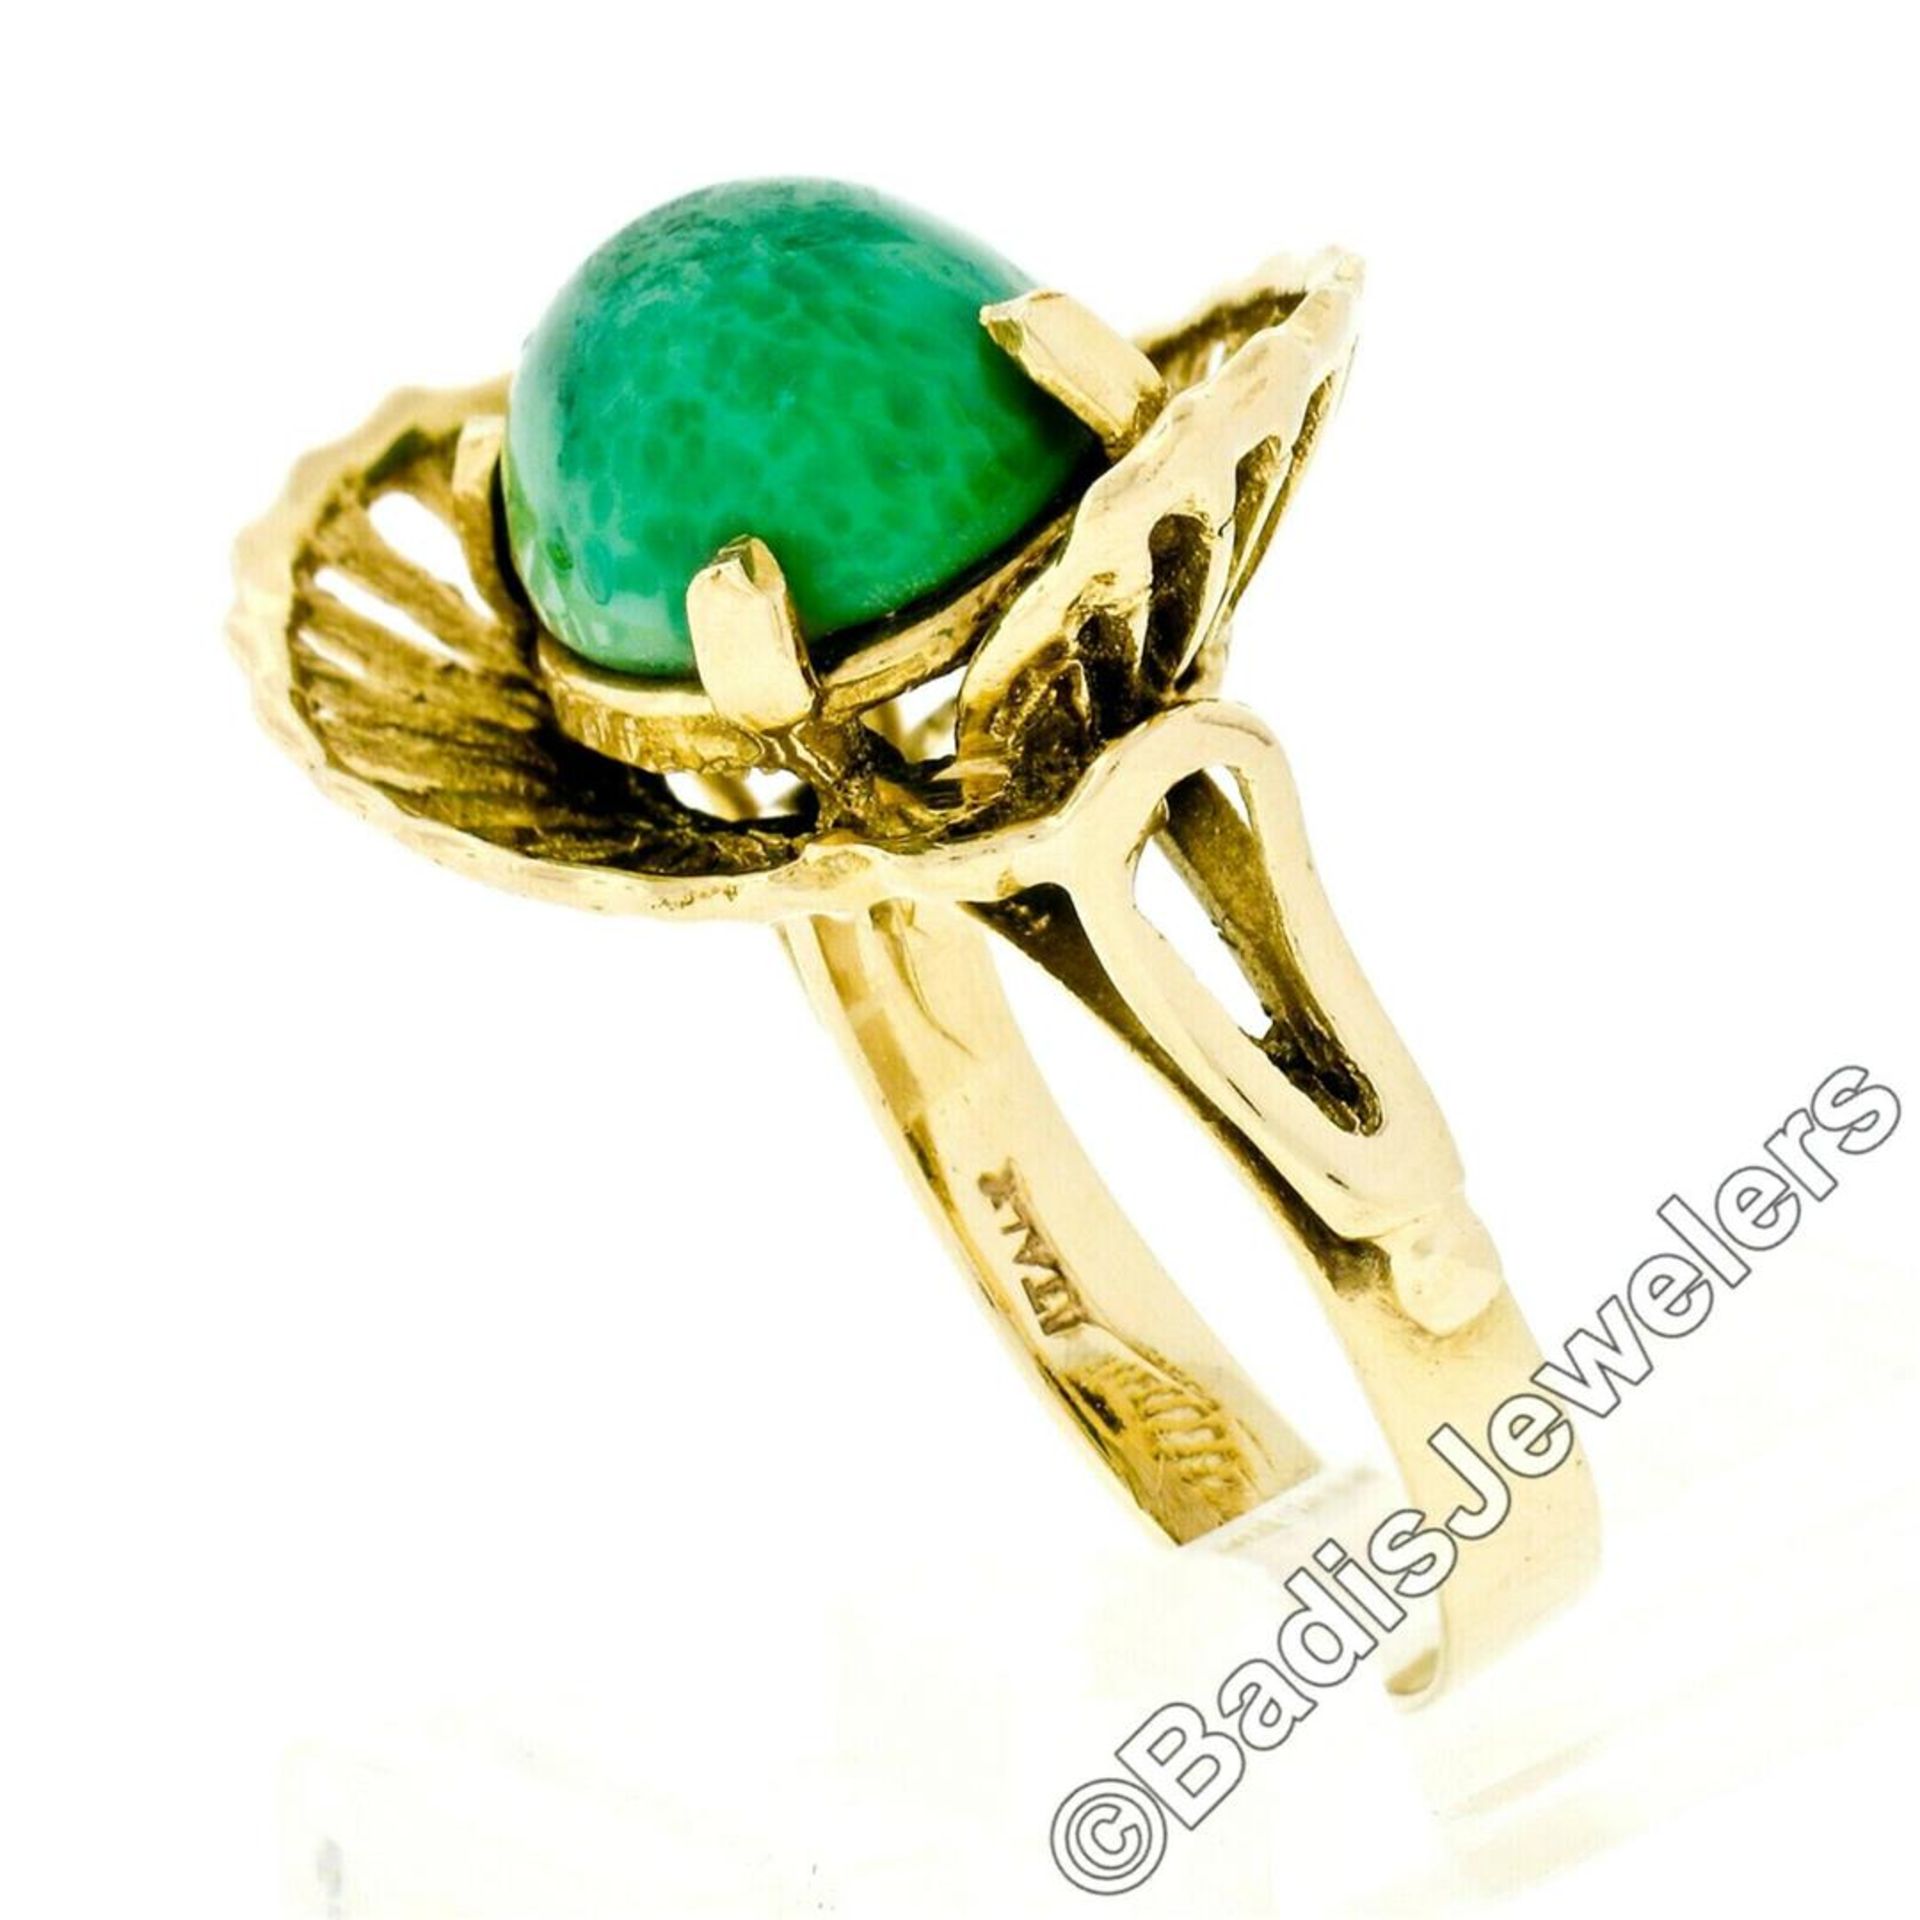 Vintage Handmade 18kt Yellow Gold Oval Jade Solitaire Ring - Image 5 of 8